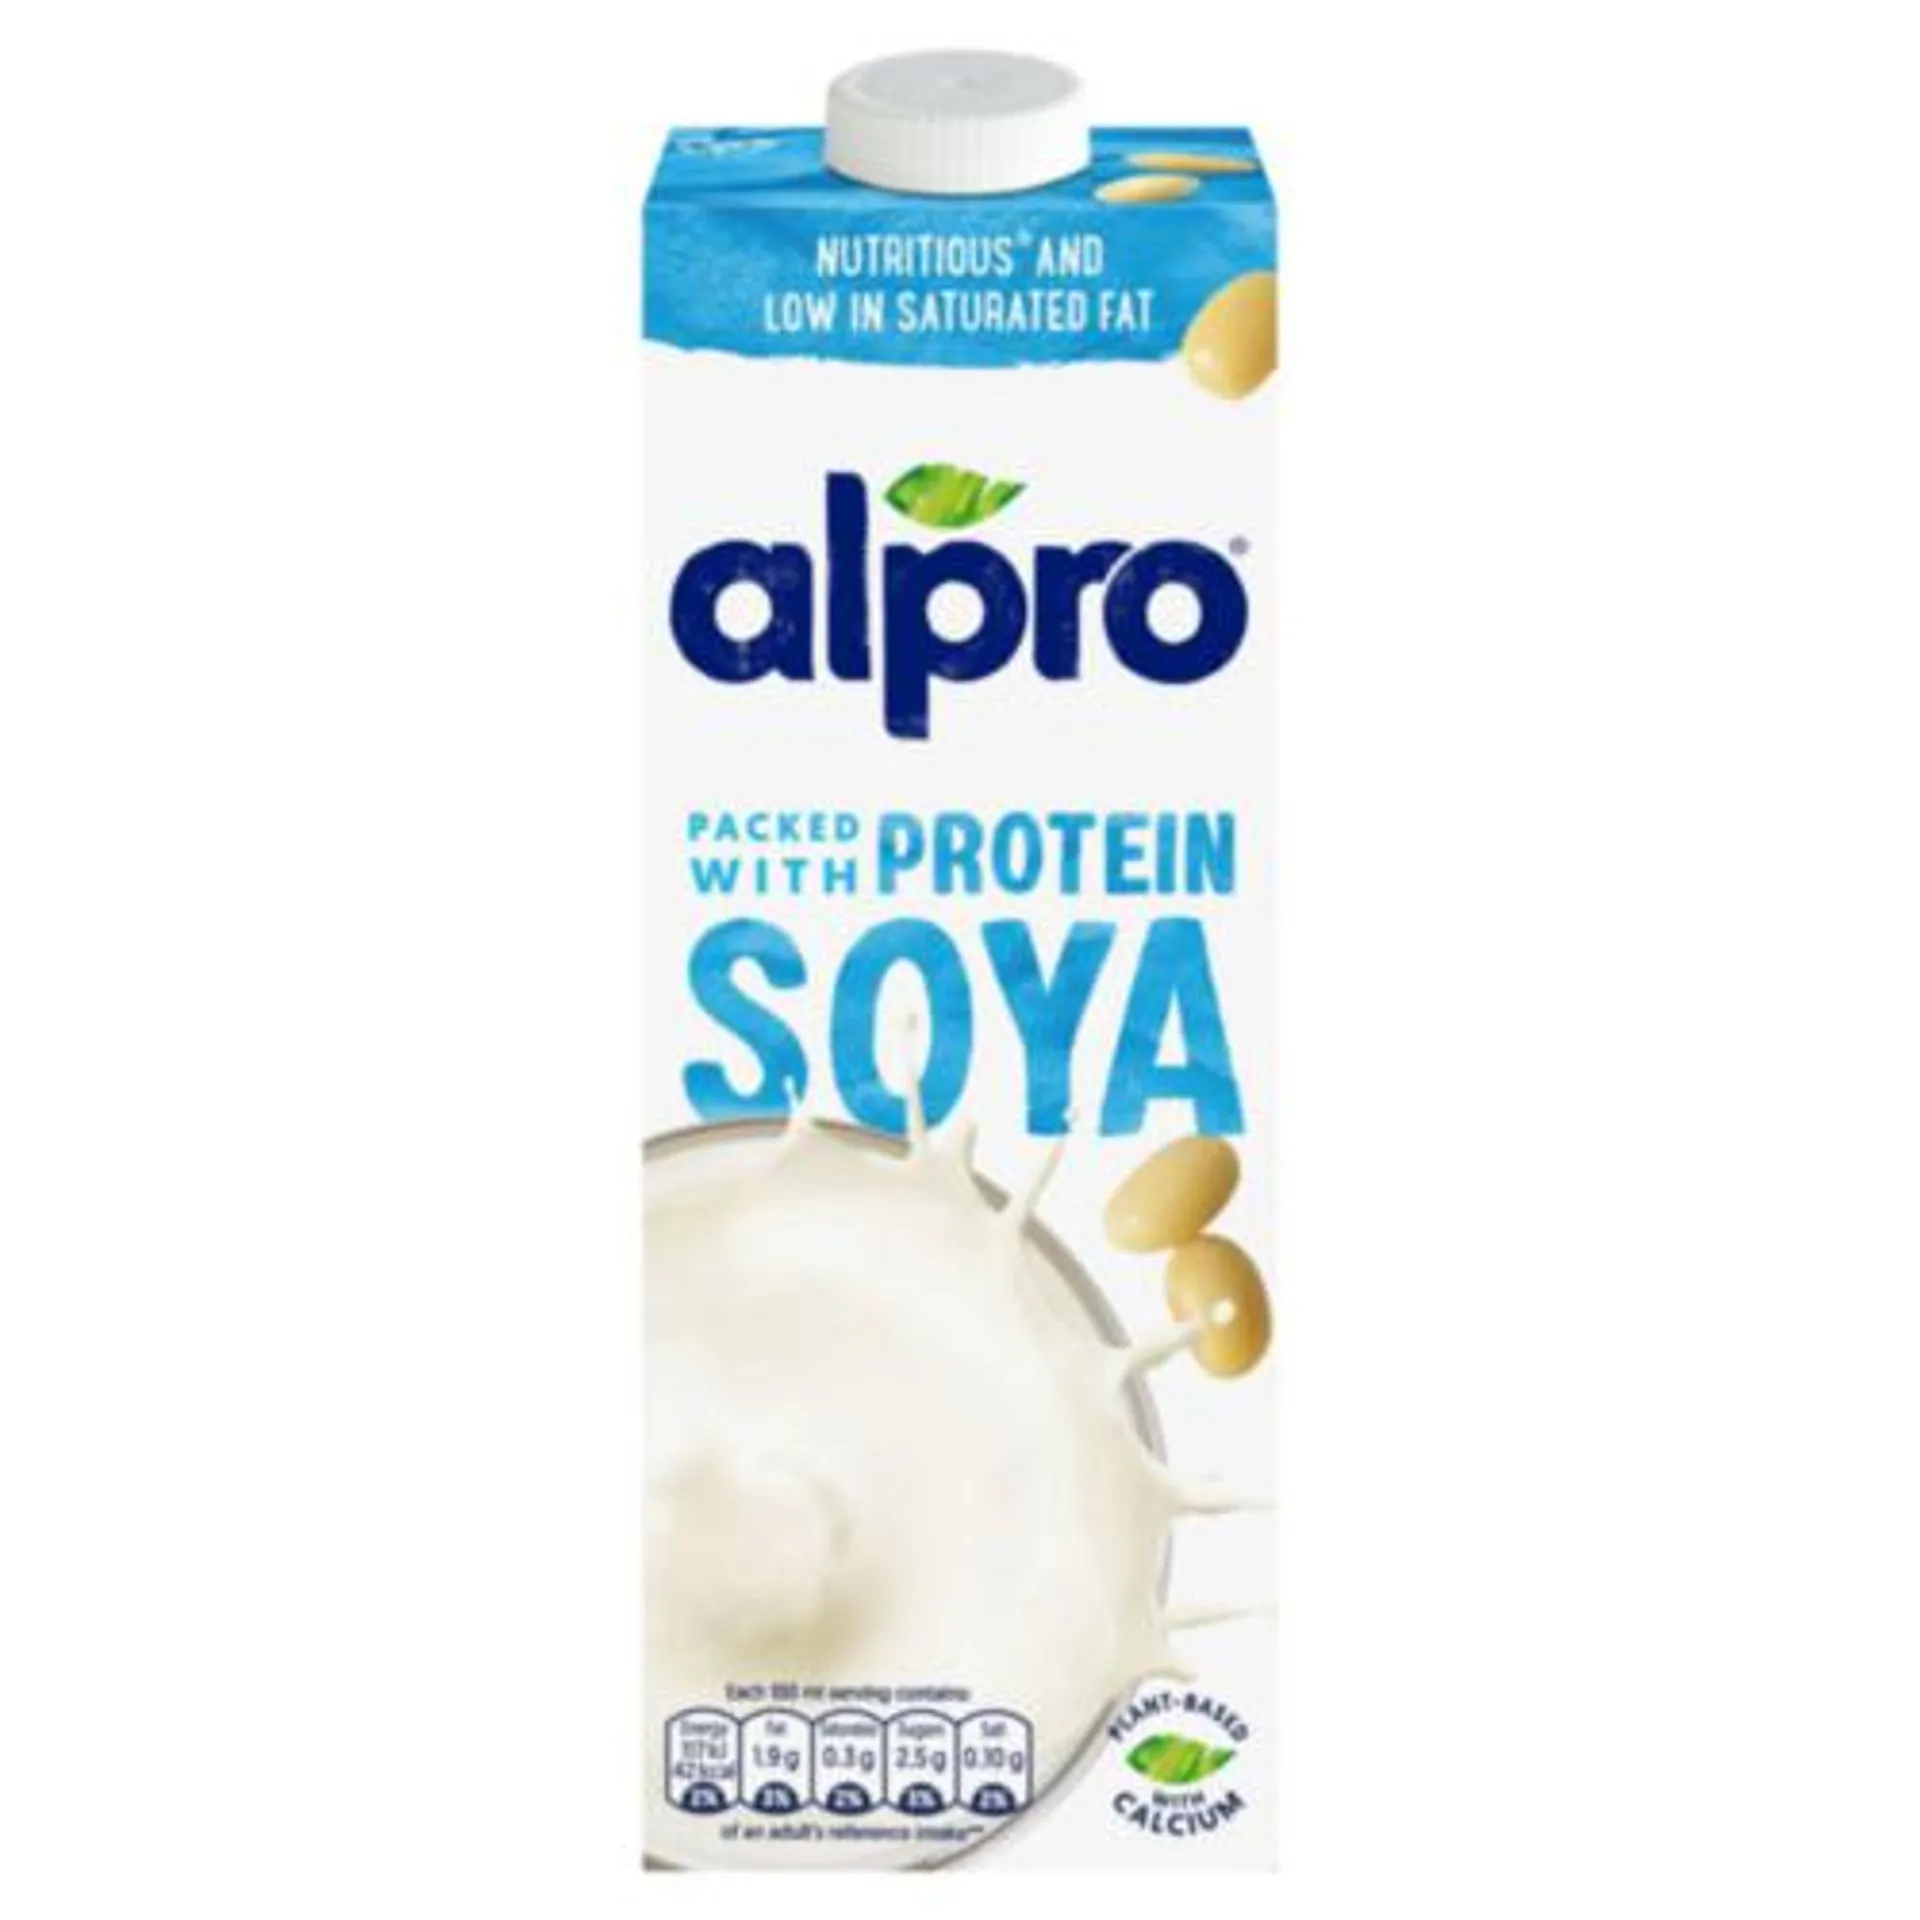 Alpro Packed with Protein Soya Drink